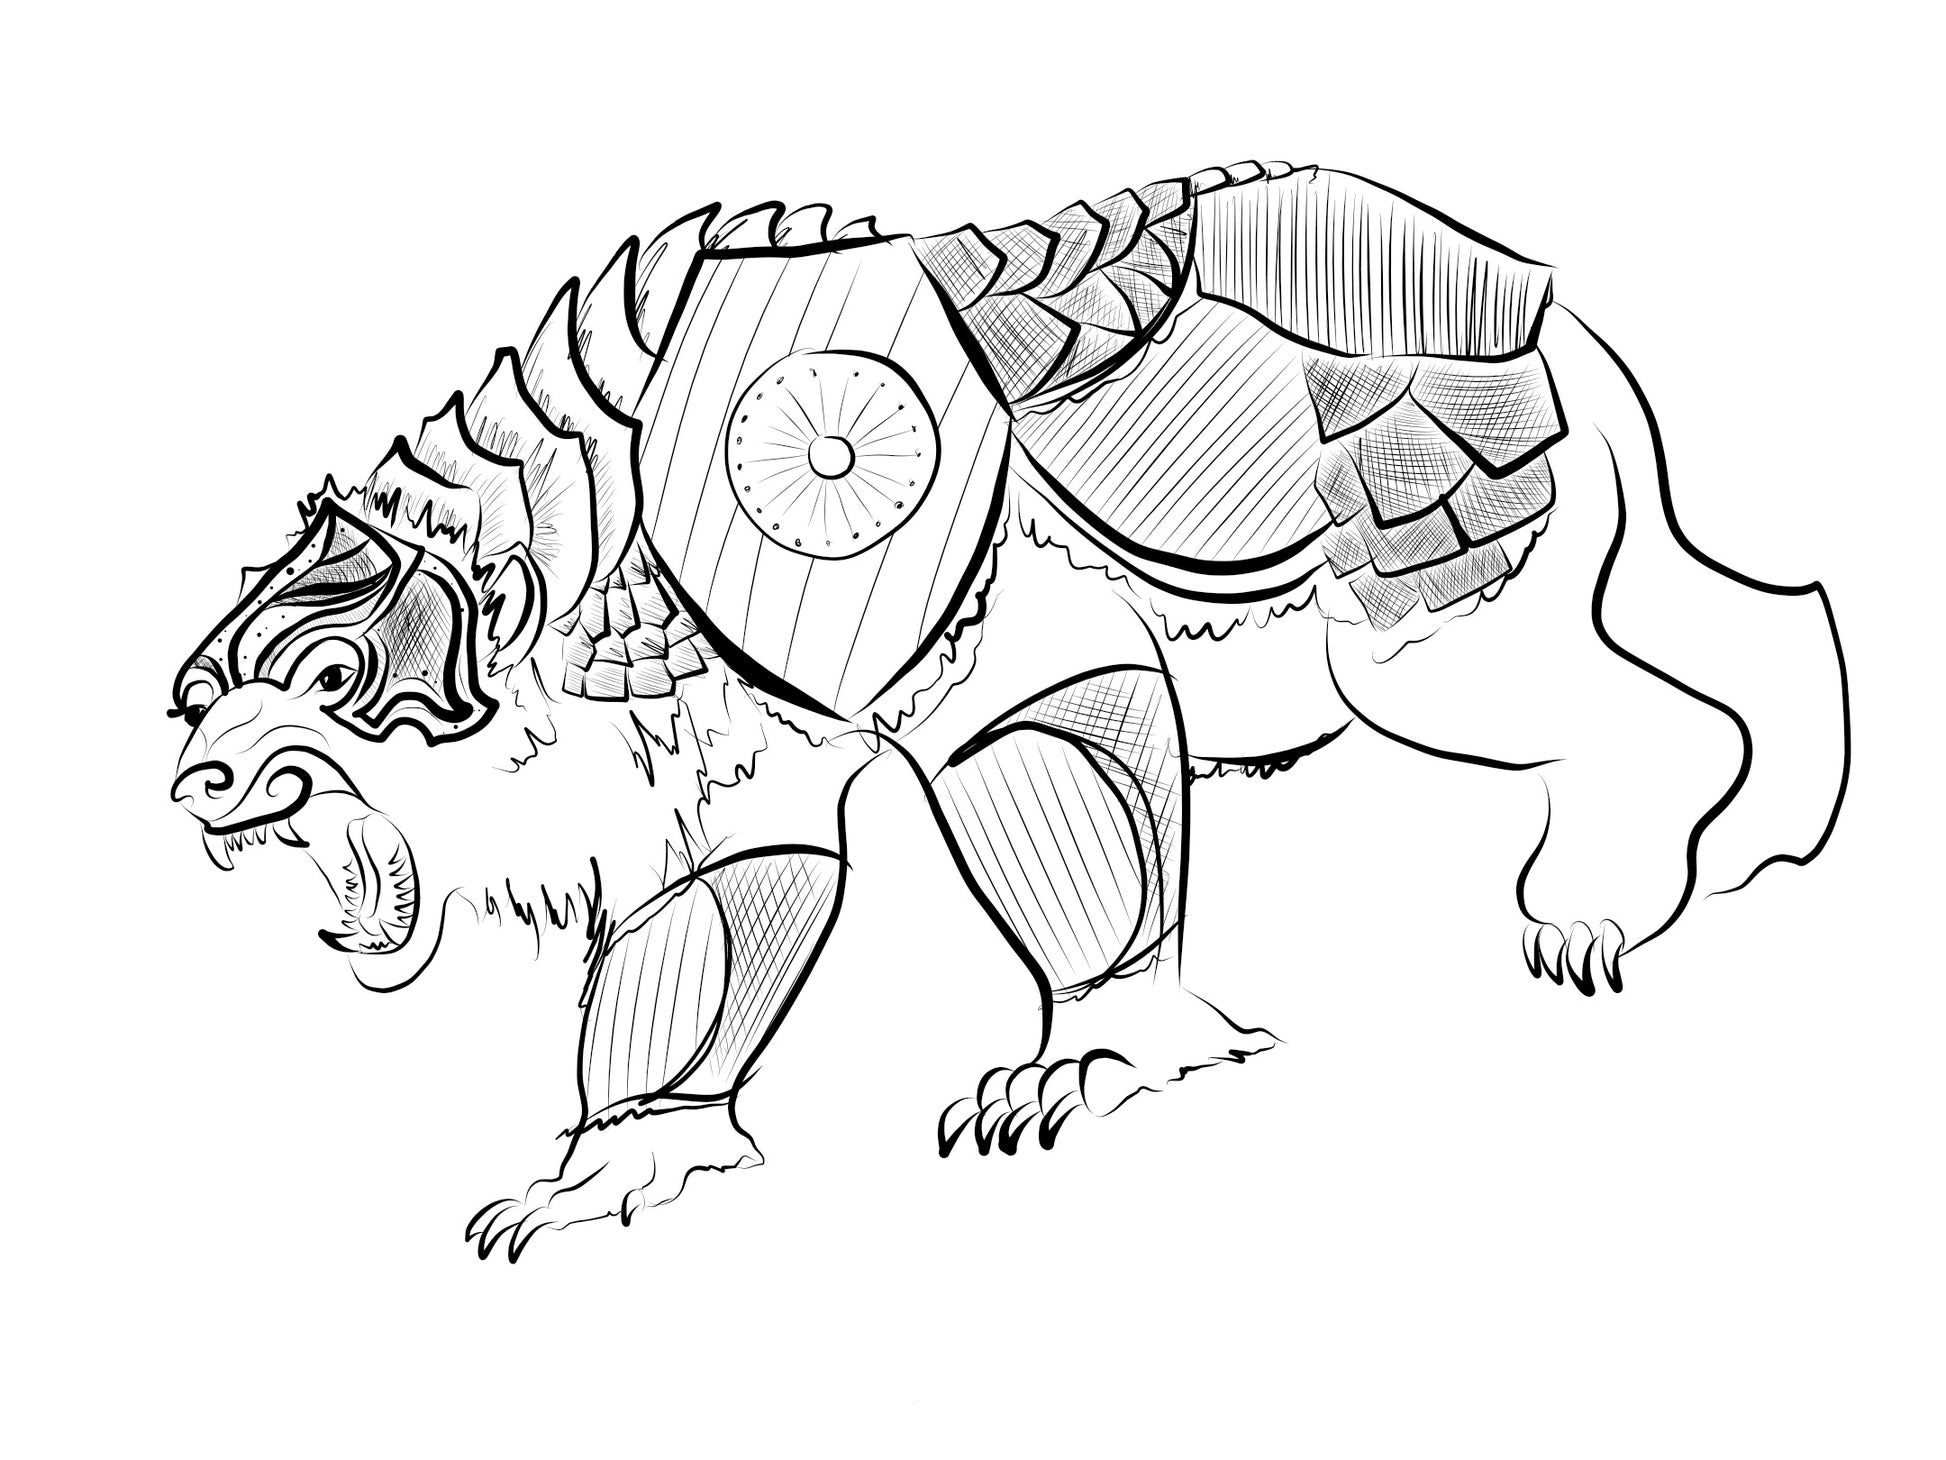 The line art of the Lorek print which is a polar bear covered in armor